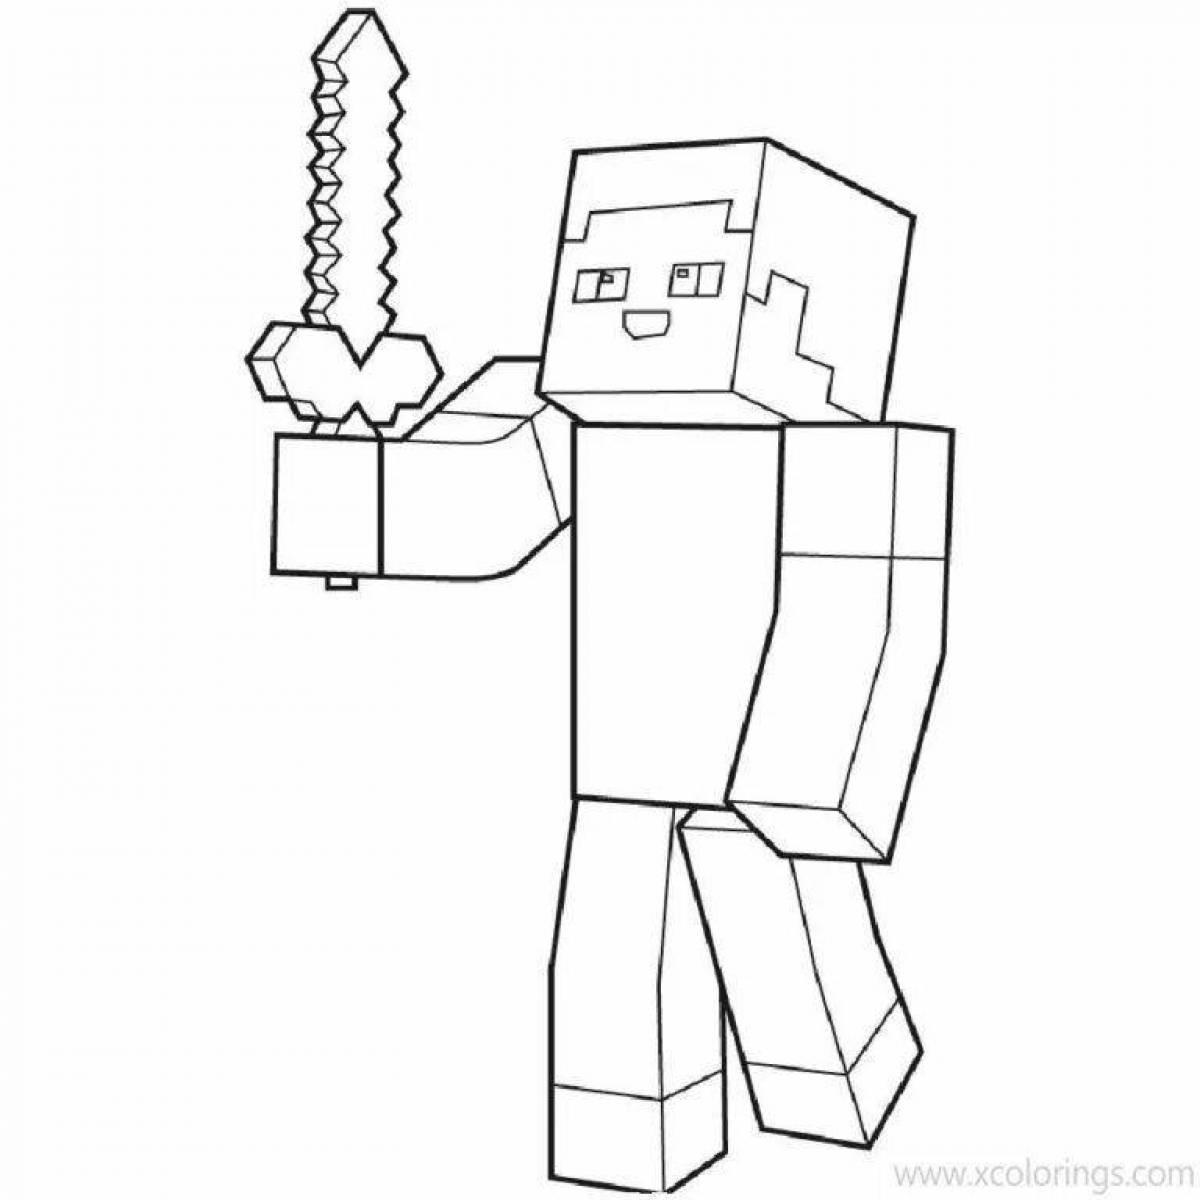 Funny alex and steve minecraft coloring